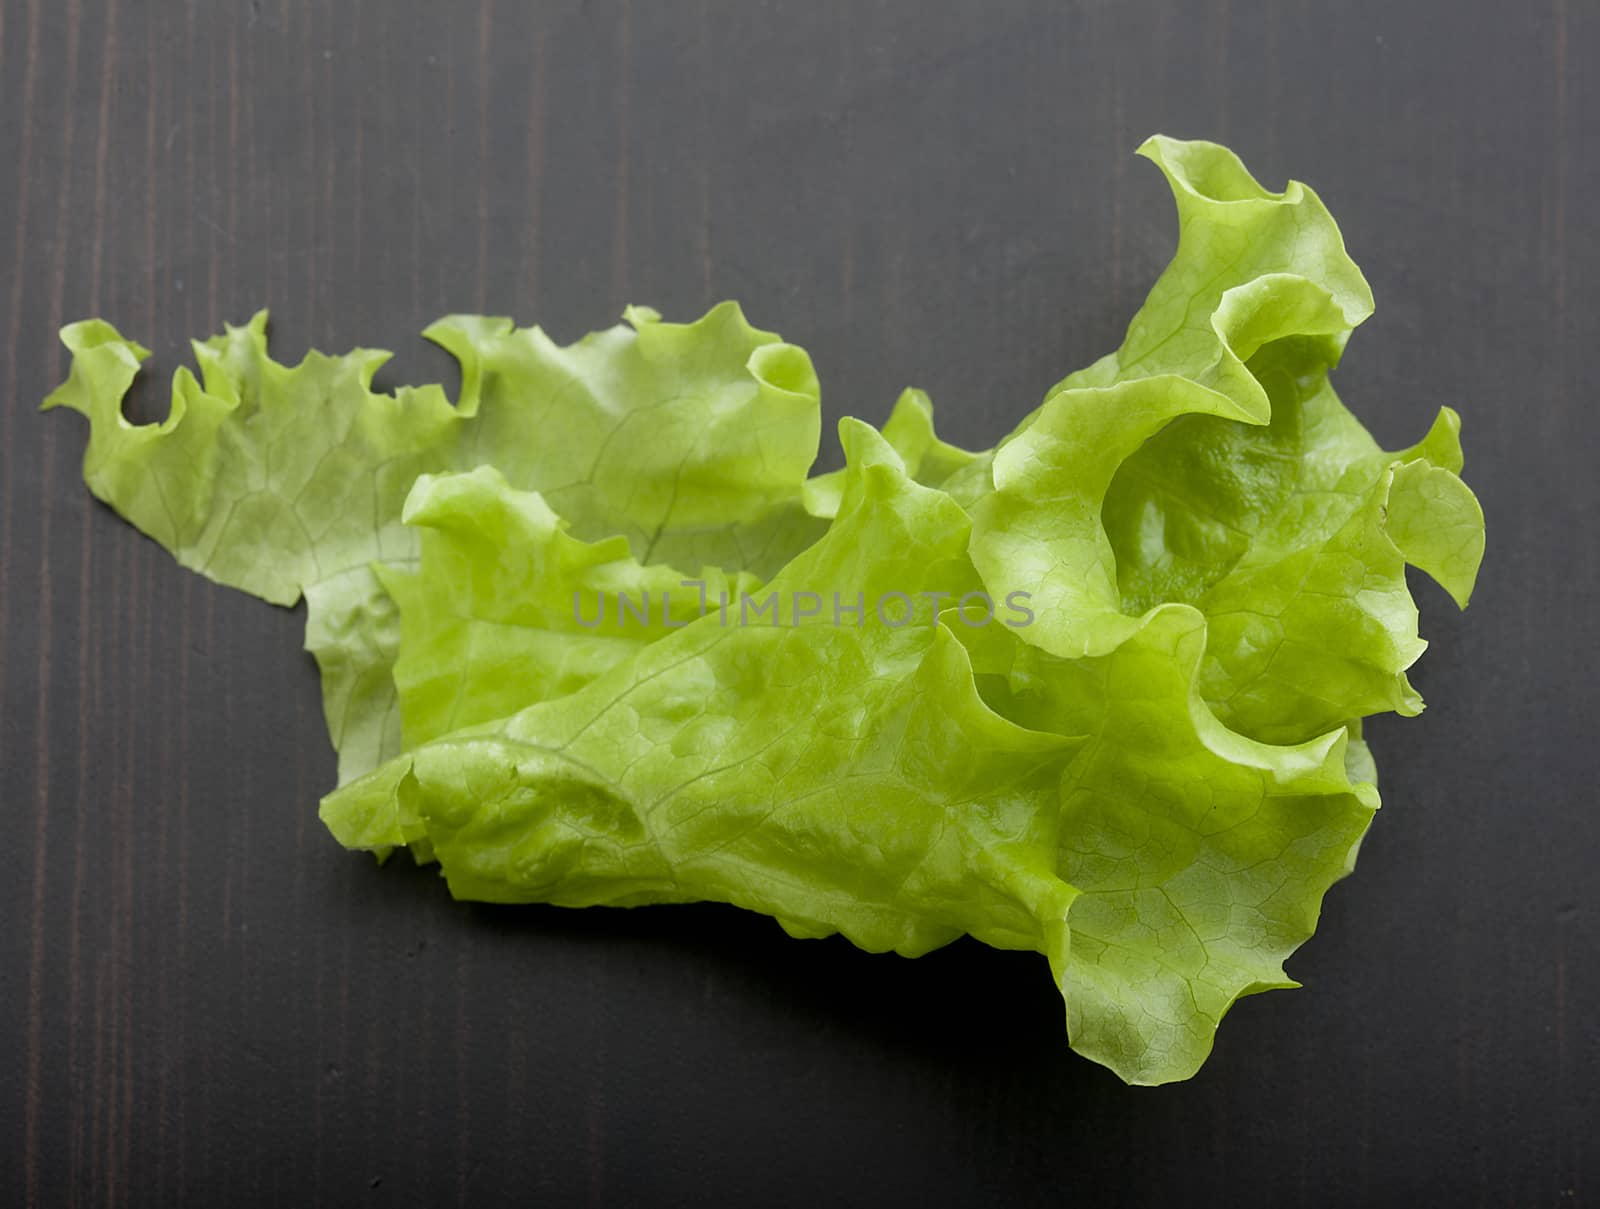 Leaf of lettuce on the wooden table by Angorius